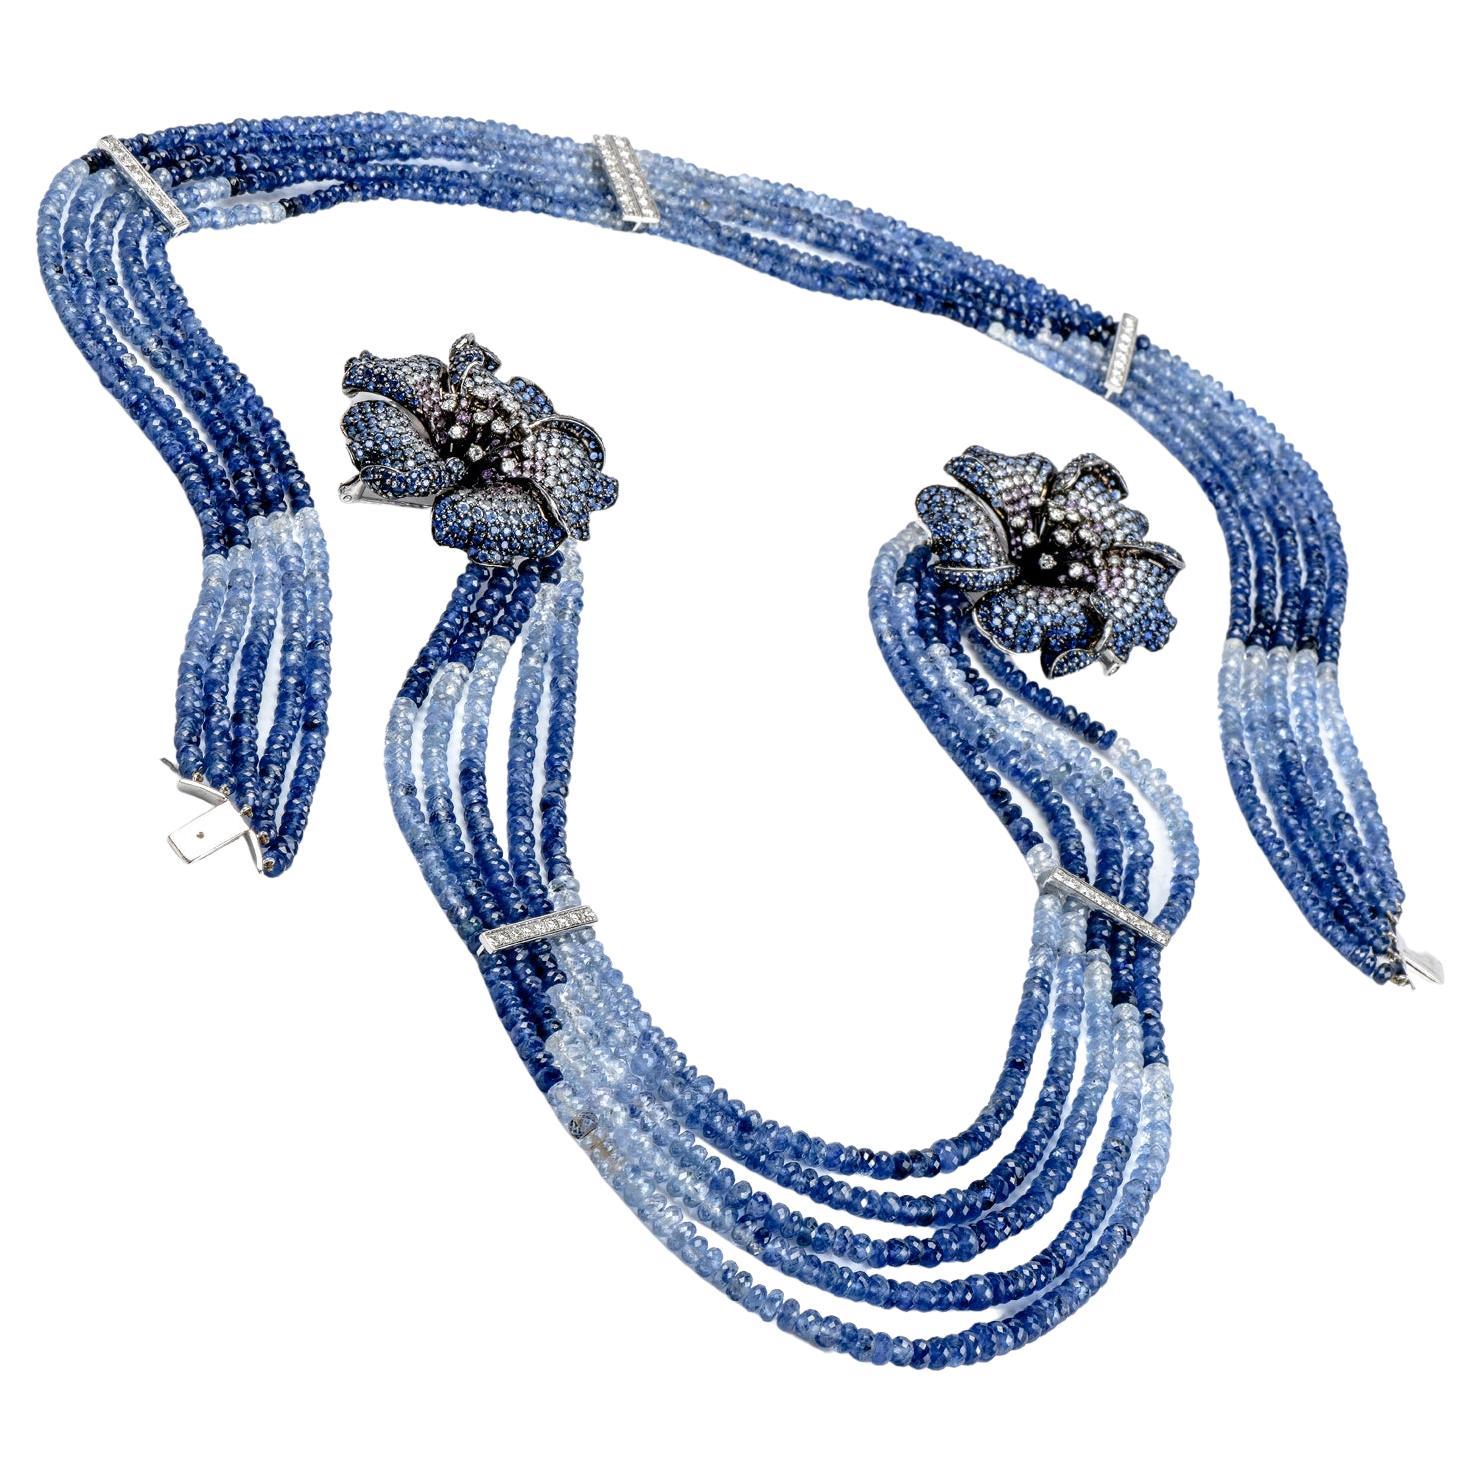 Bask in the beauty of this refreshingly decadent Diamond Sapphire 18K Gold Flower Multistrand Ombre Necklace Brooch! 

This necklace has 5 ombre strands of light to dark-colored genuine blue sapphire beads, with 6 rows of genuine glittering diamonds